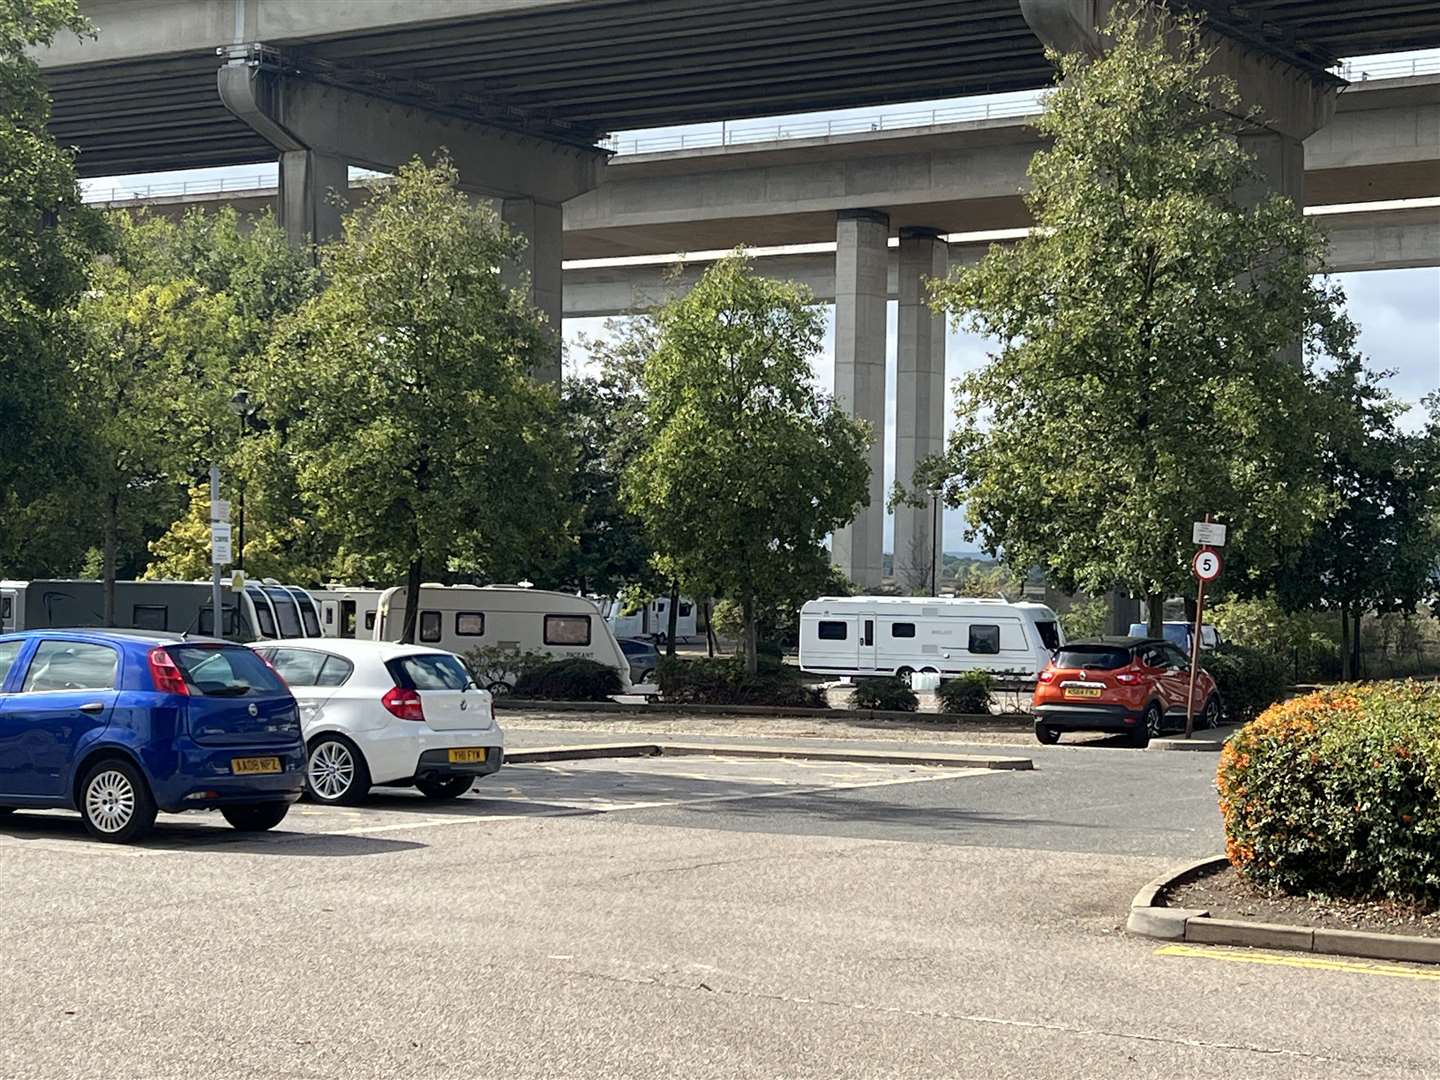 Travellers were spotted pitching up in Medway Valley Leisure Park this morning